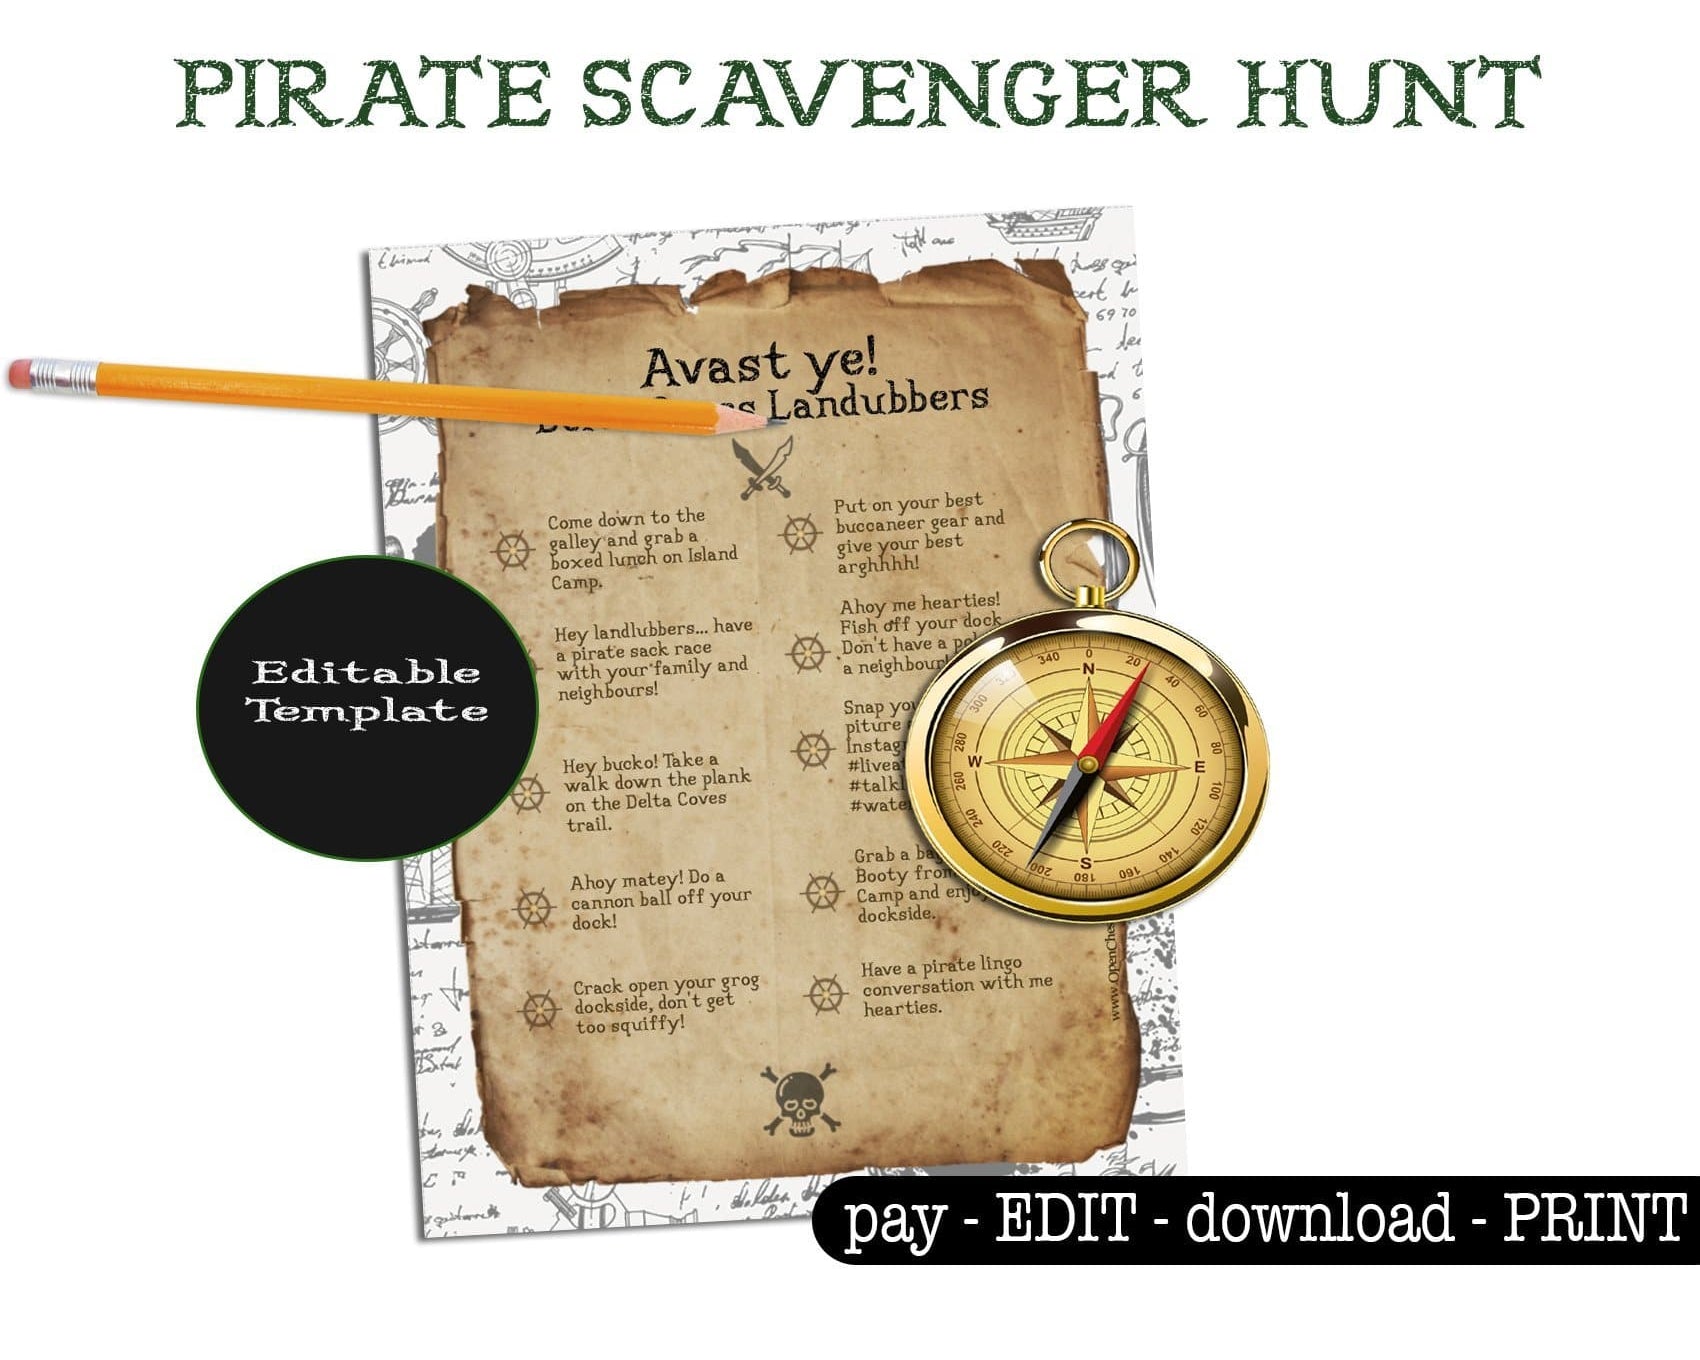 Pirate Scavenger Hunt - Open Chests